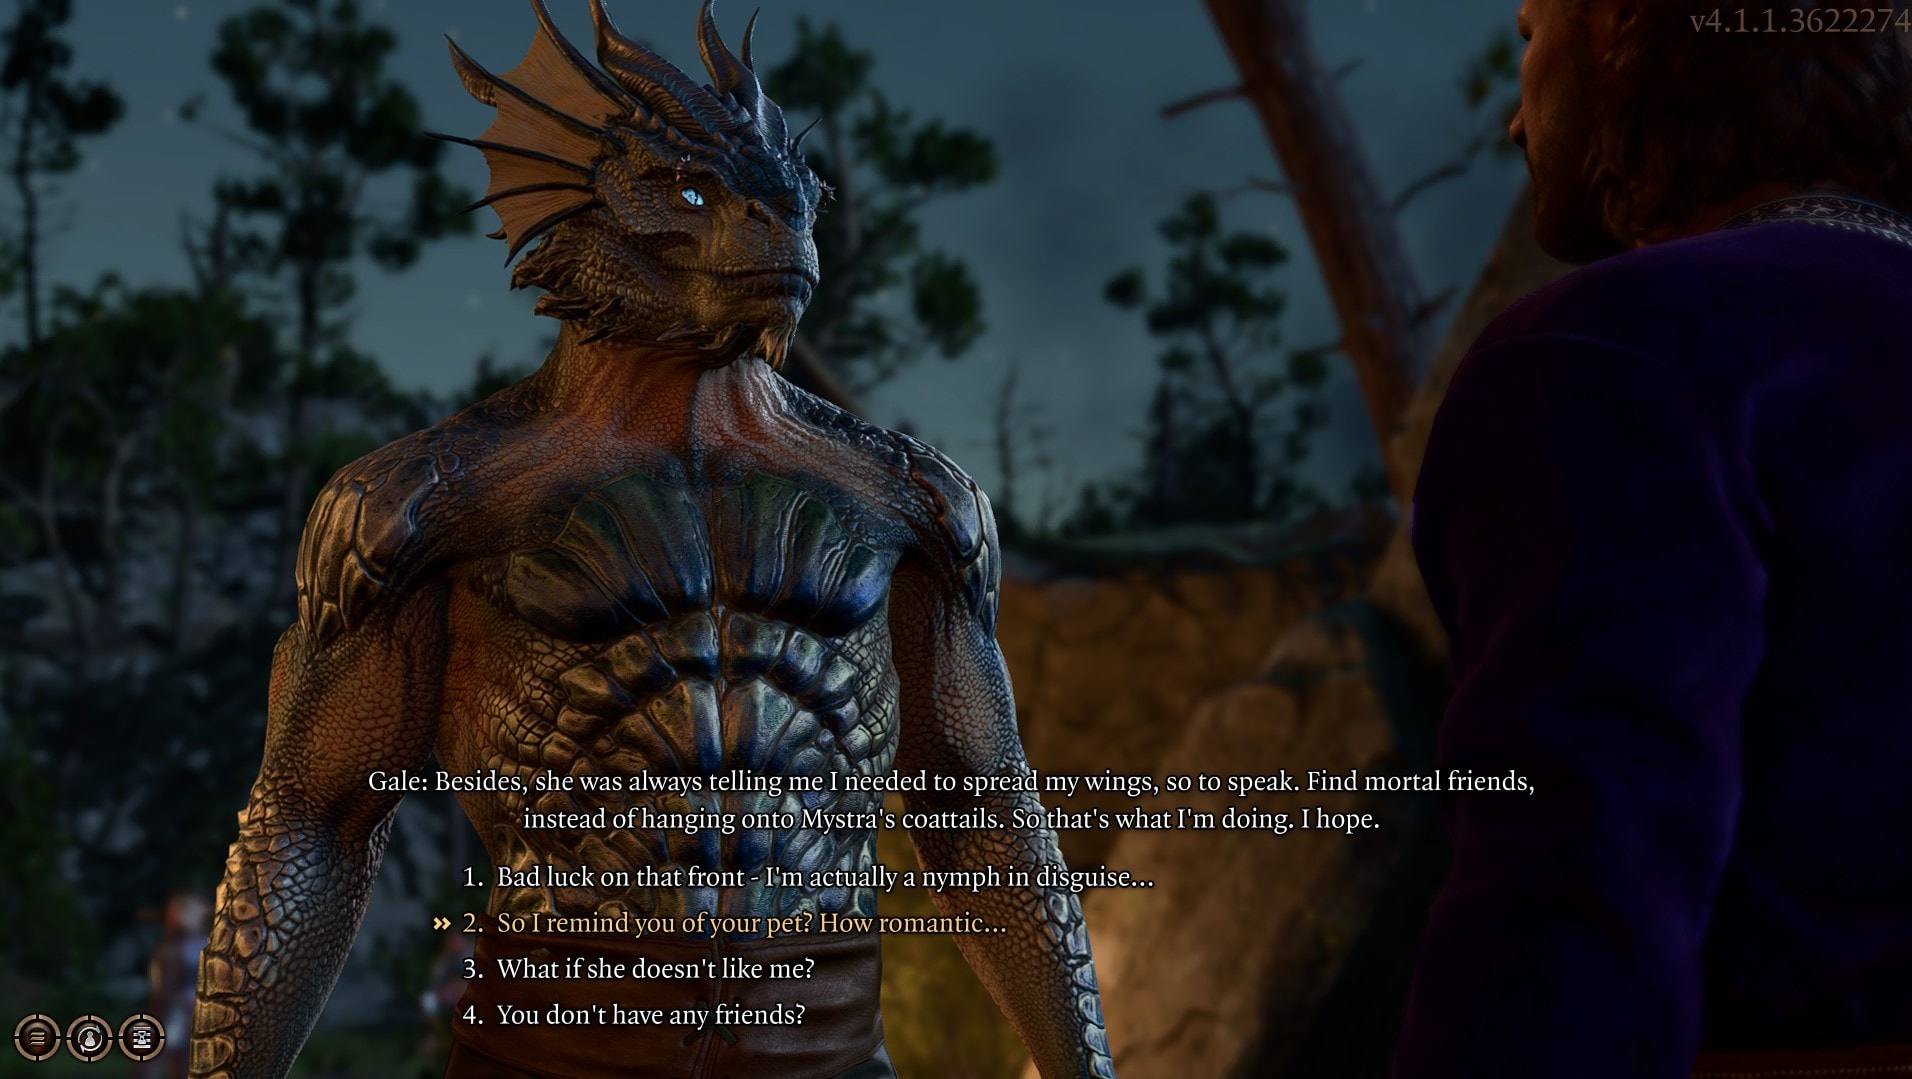 Tav the dragonborn talking to Gale with the dialogue option "I remind you of your pet, how romantic" highlighted